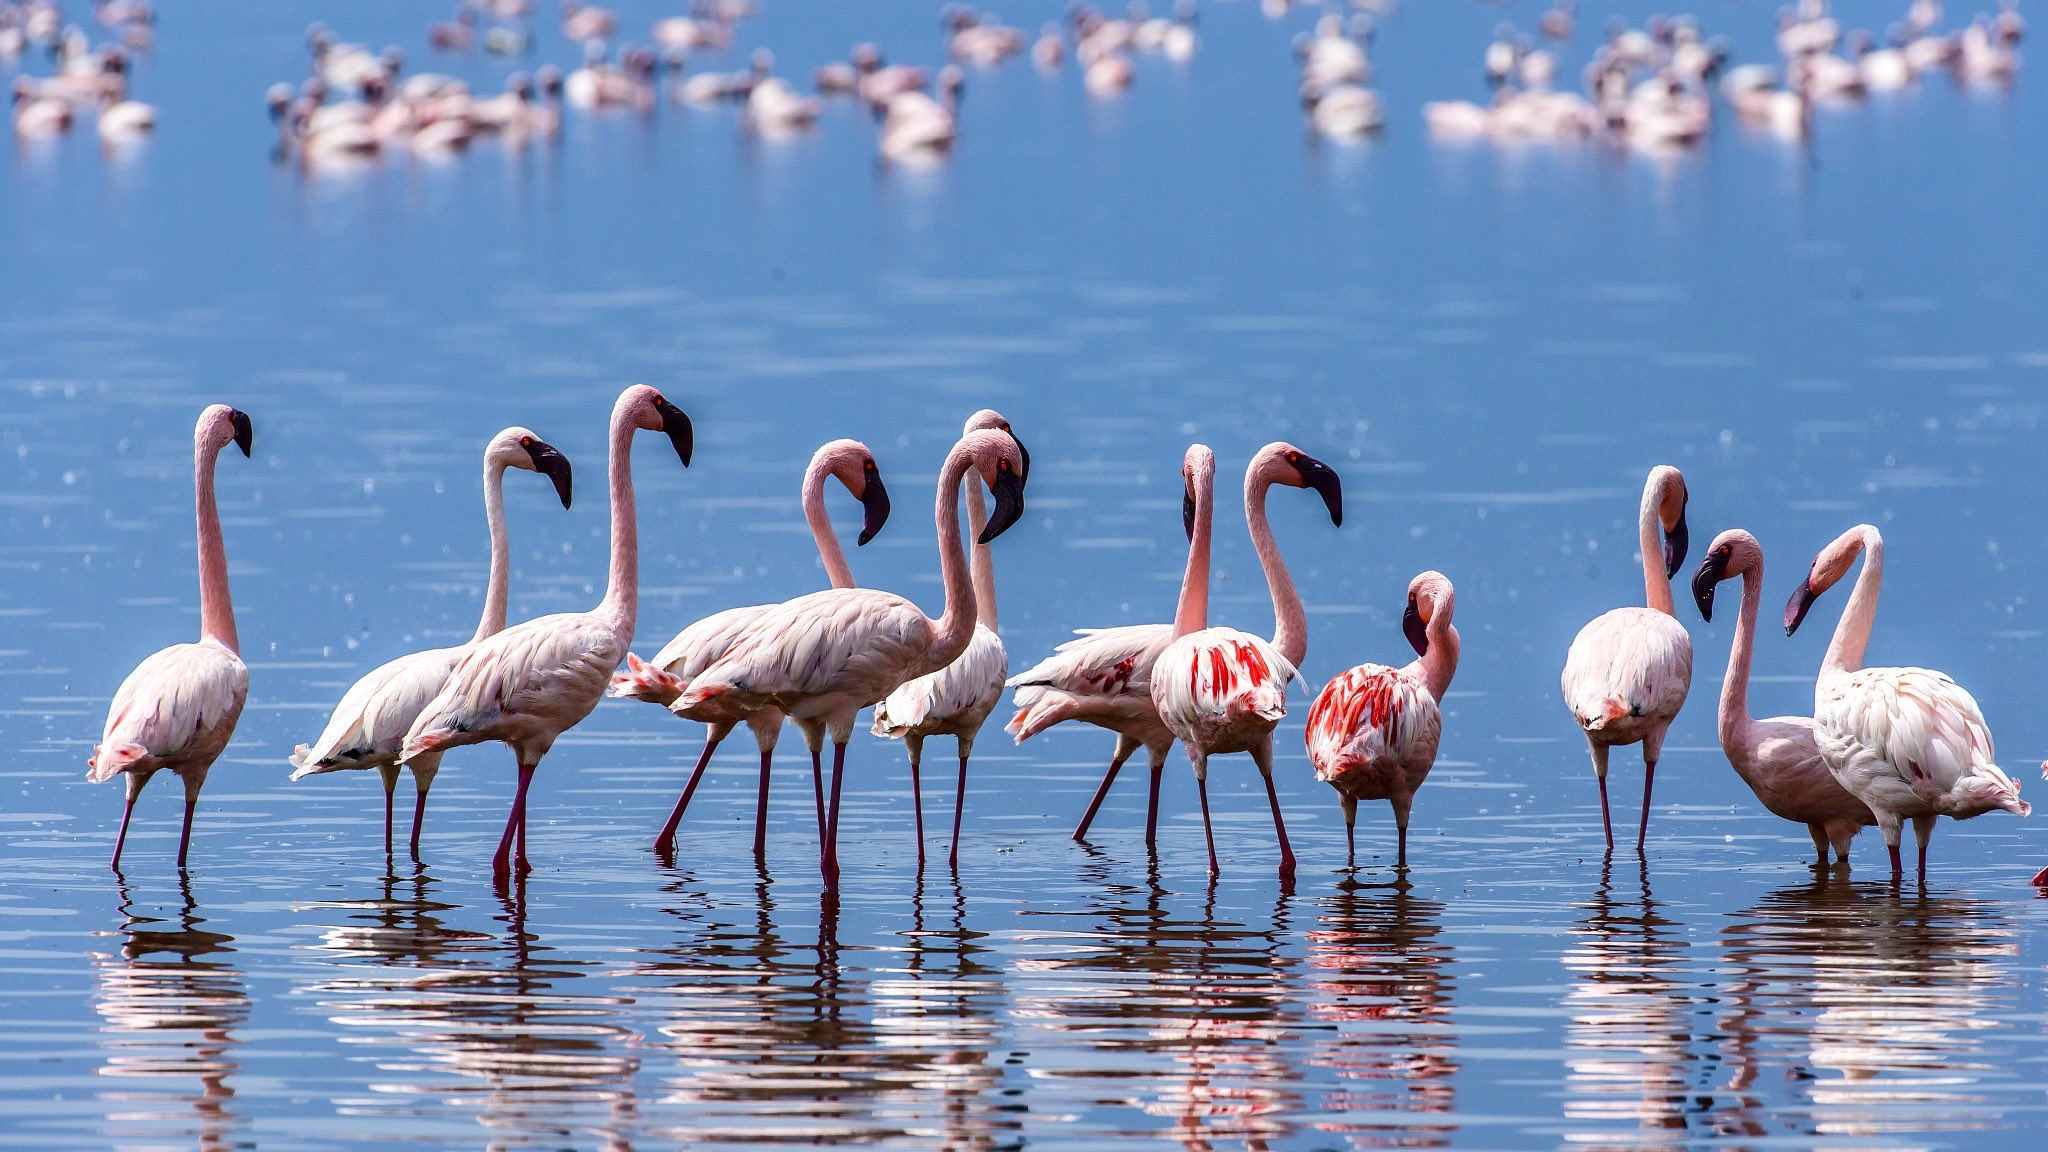 Flamingo protection in UAE achieves major results - CGTN